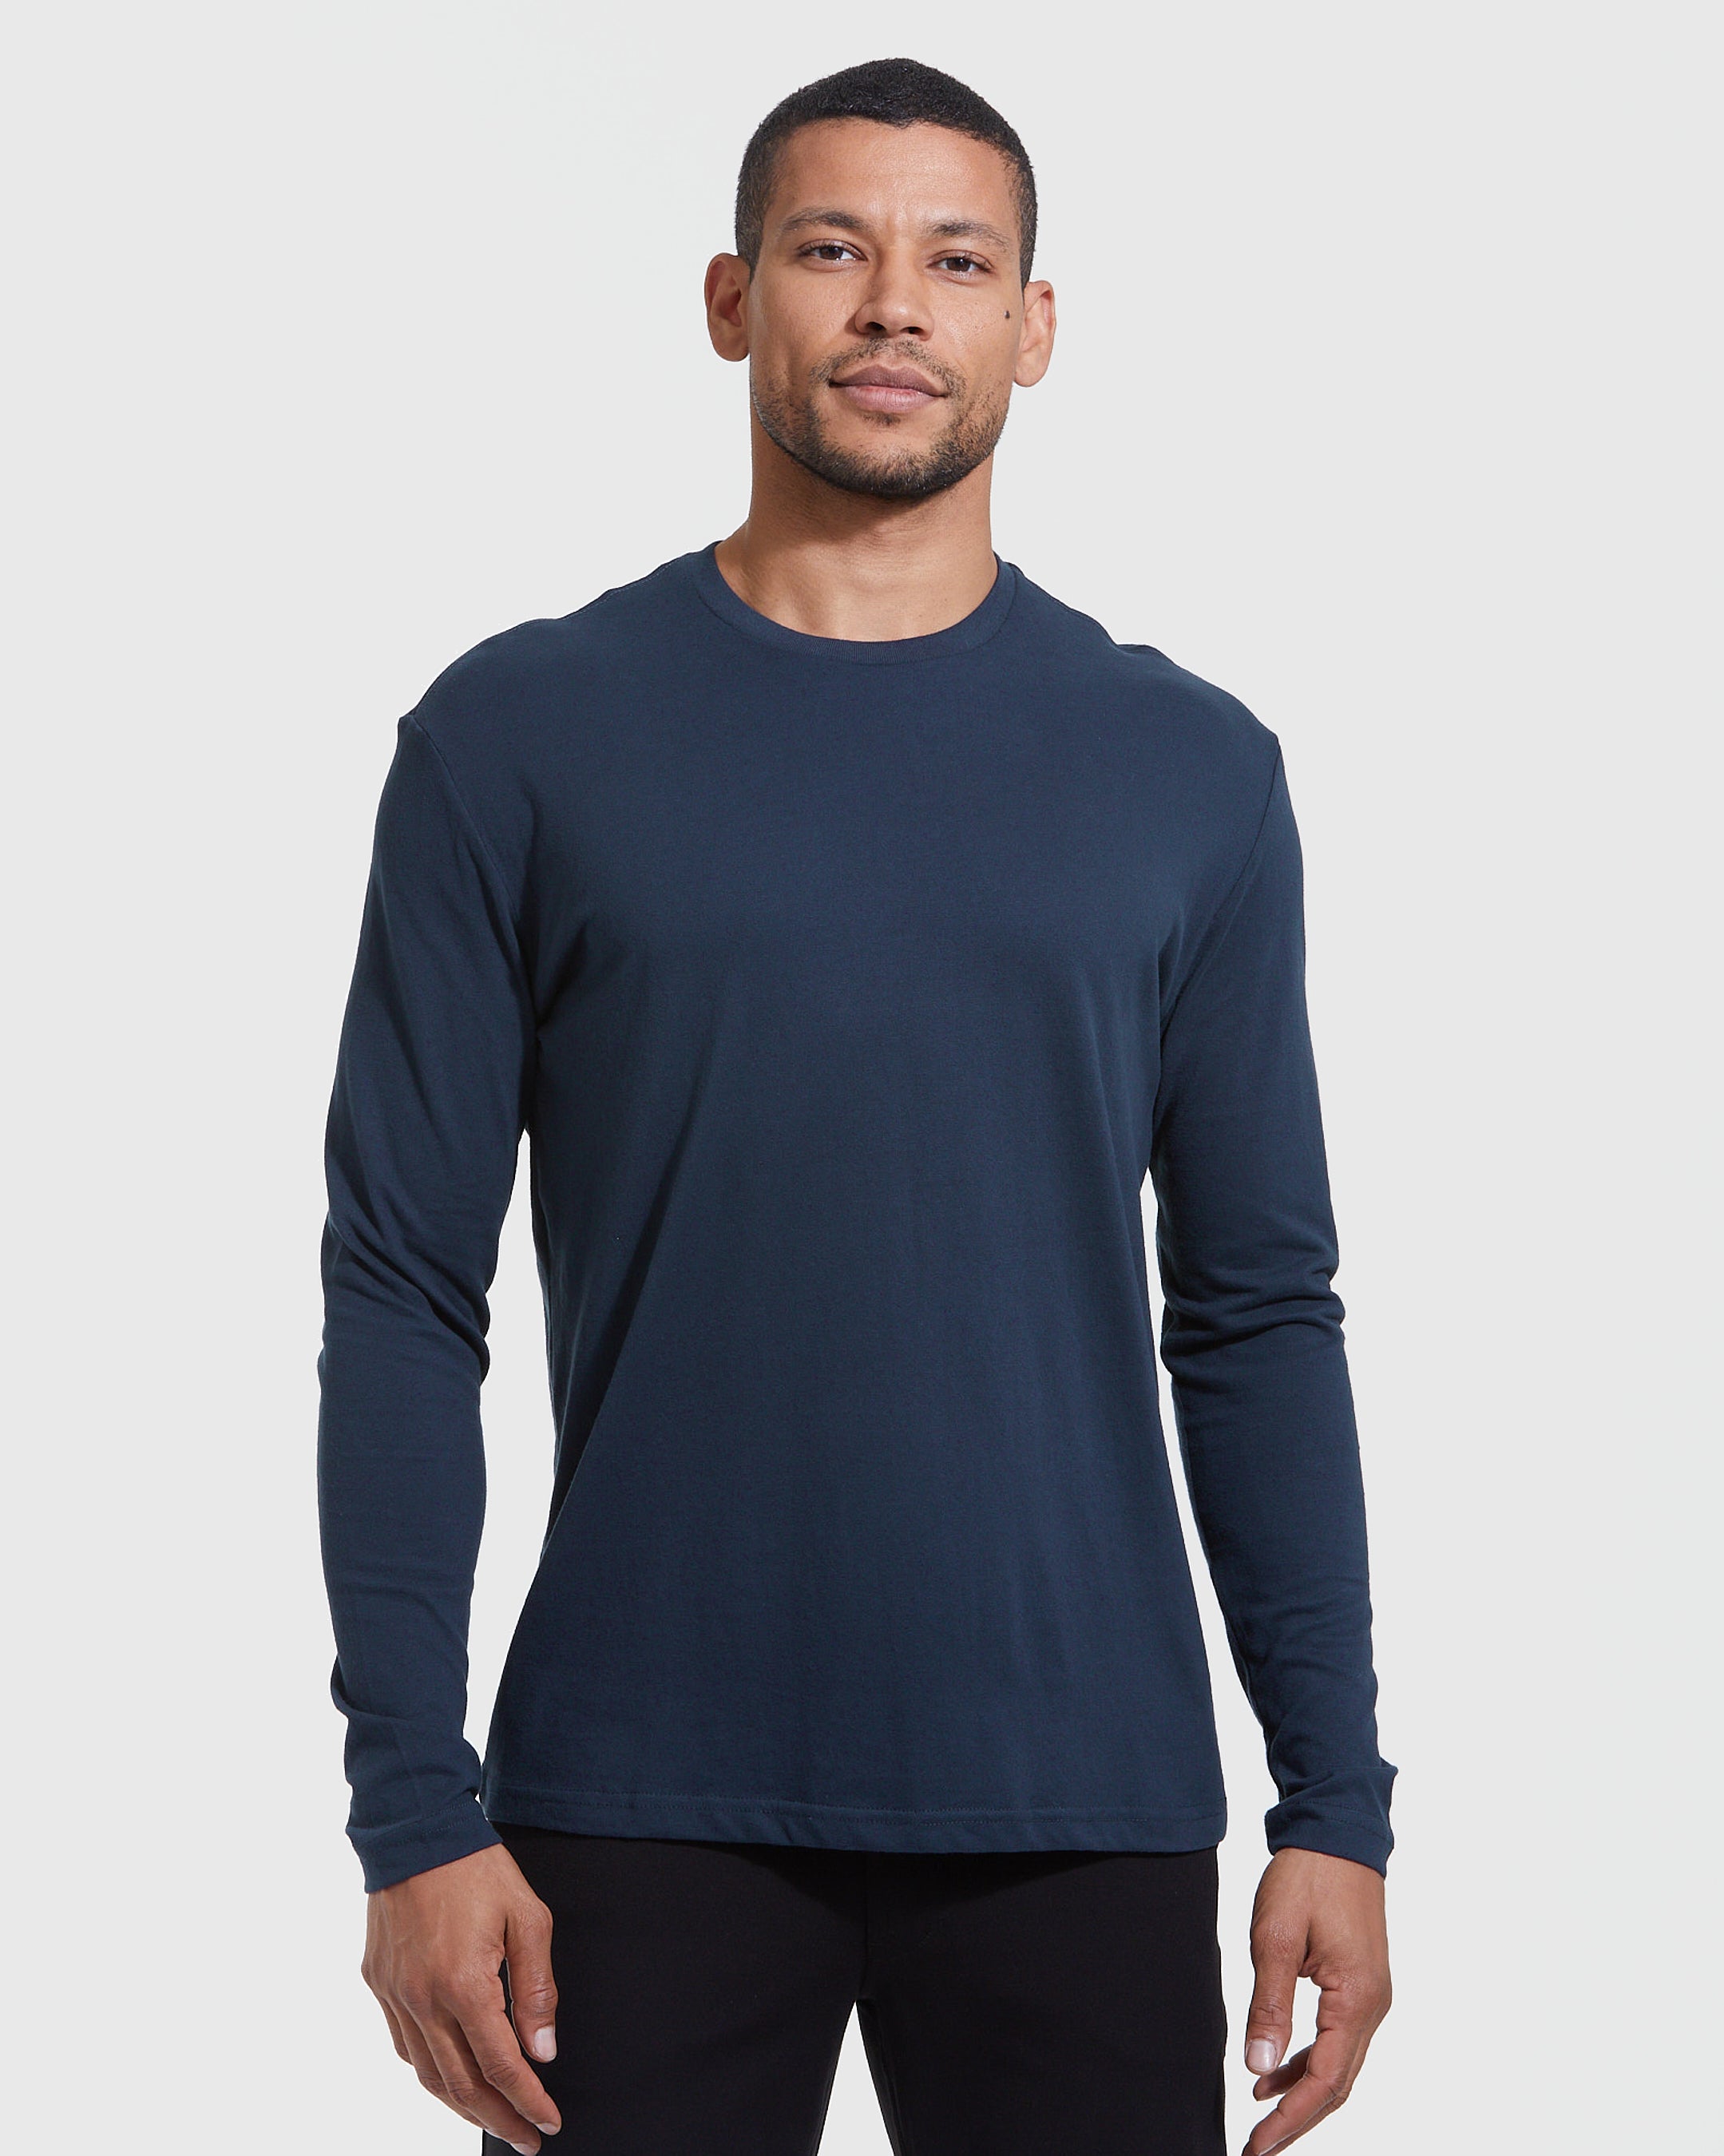 All Navy Long Sleeve Crew 6-Pack